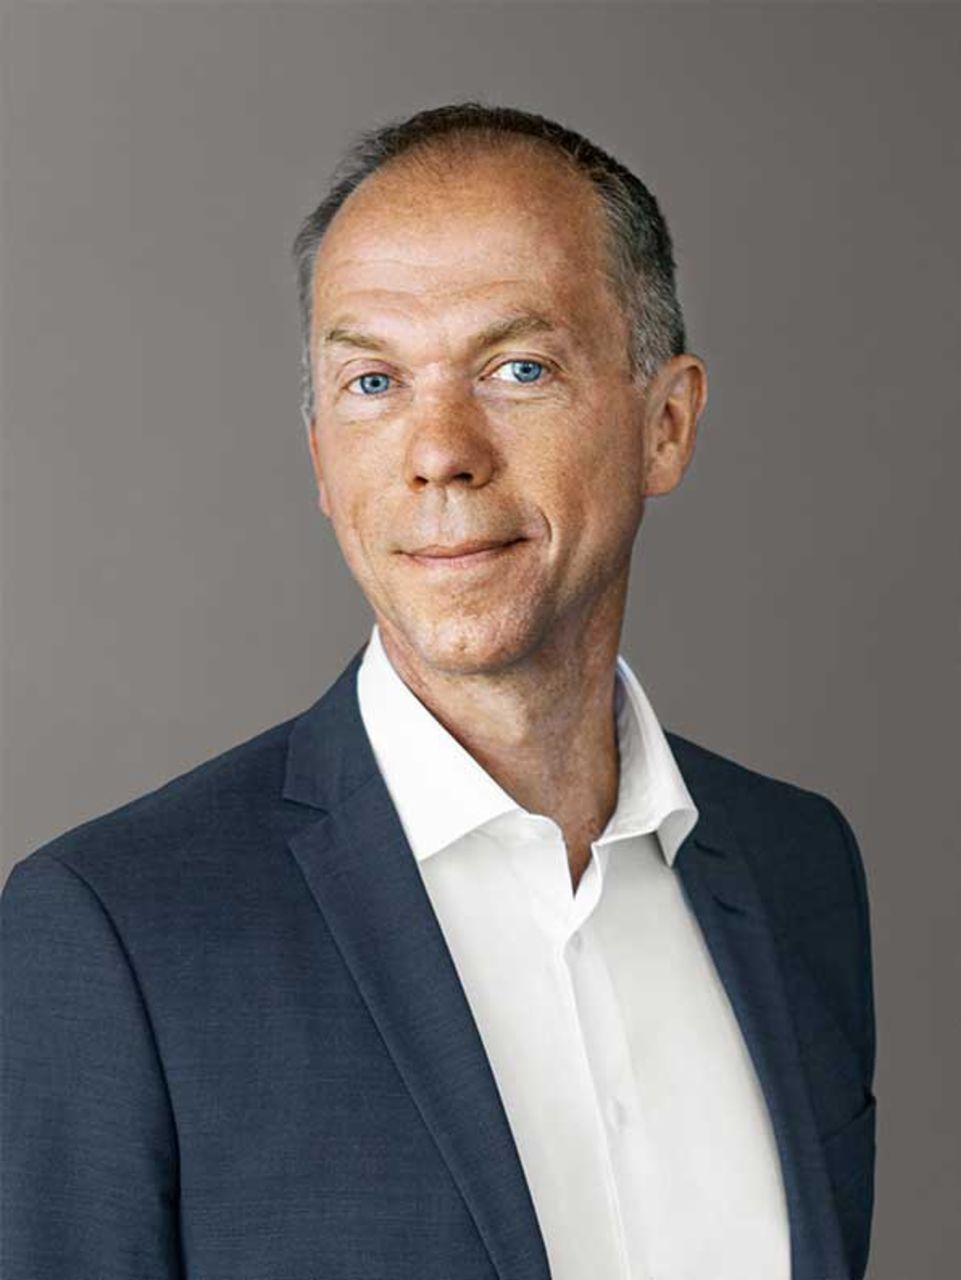 portrait of Mathias Carlbaum, Member of the Executive Board of TRATON SE, Chief Executive Officer and President of Navistar International Corporation